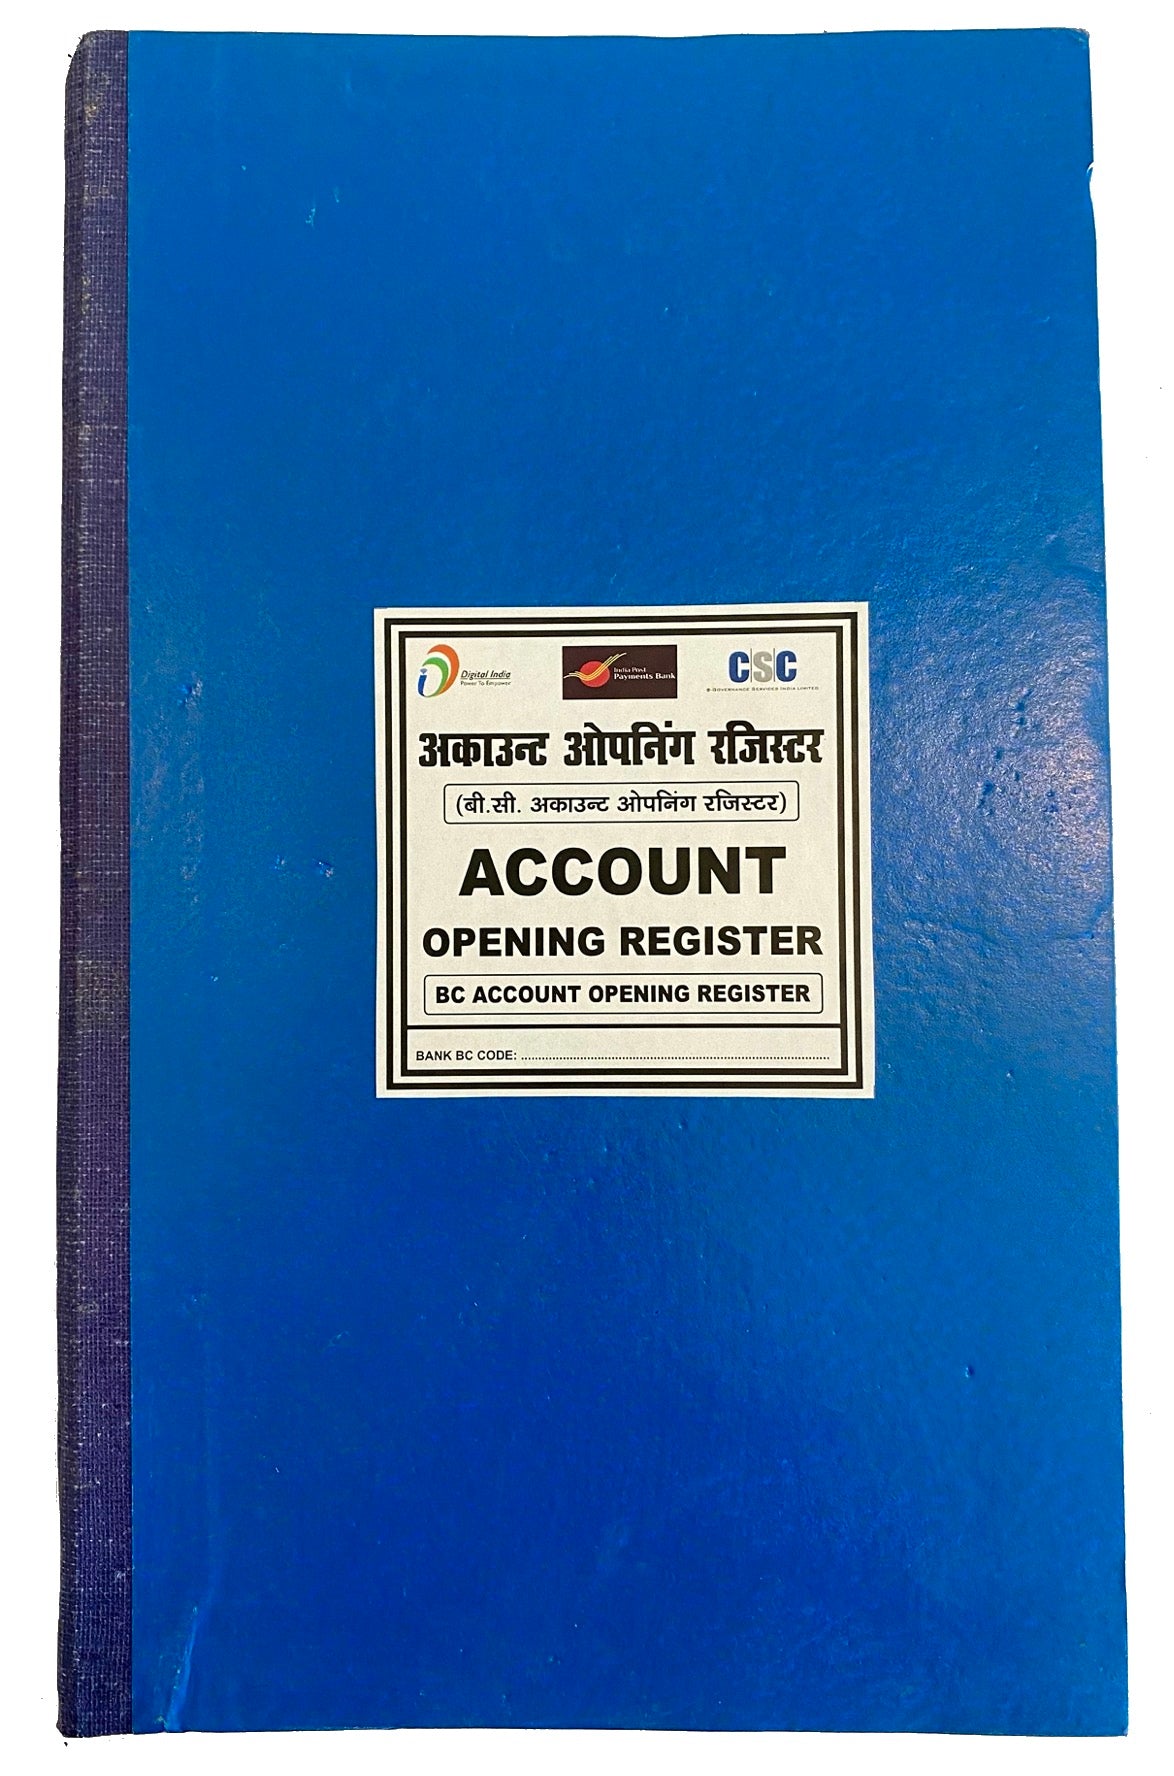 India Post Payment Bank Account Opening Register Record Book